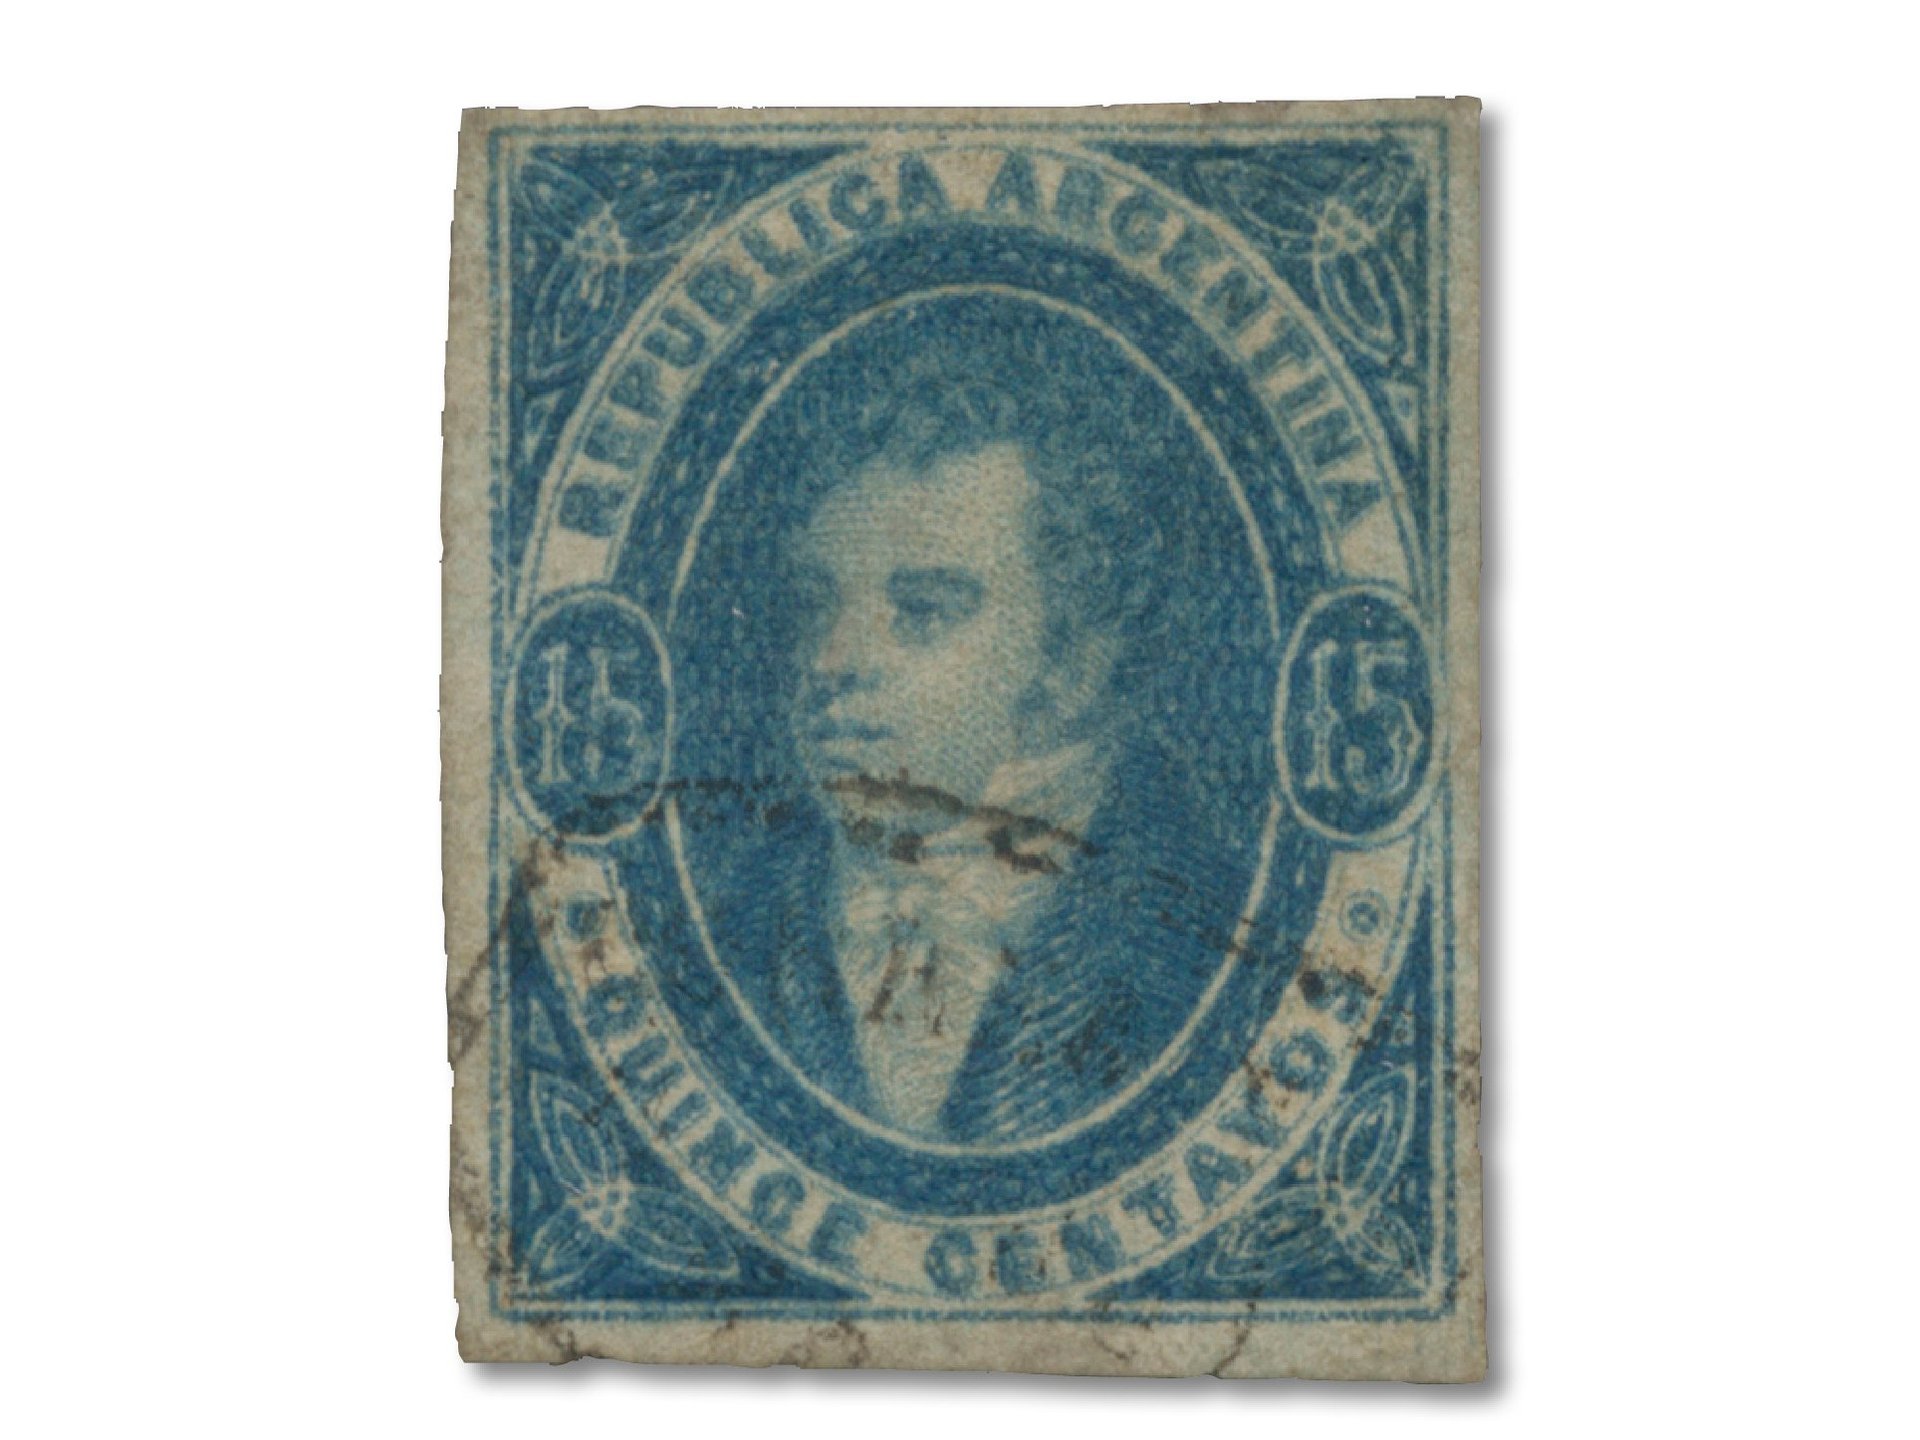 single stamp Argentina from 1864 Rivadavia